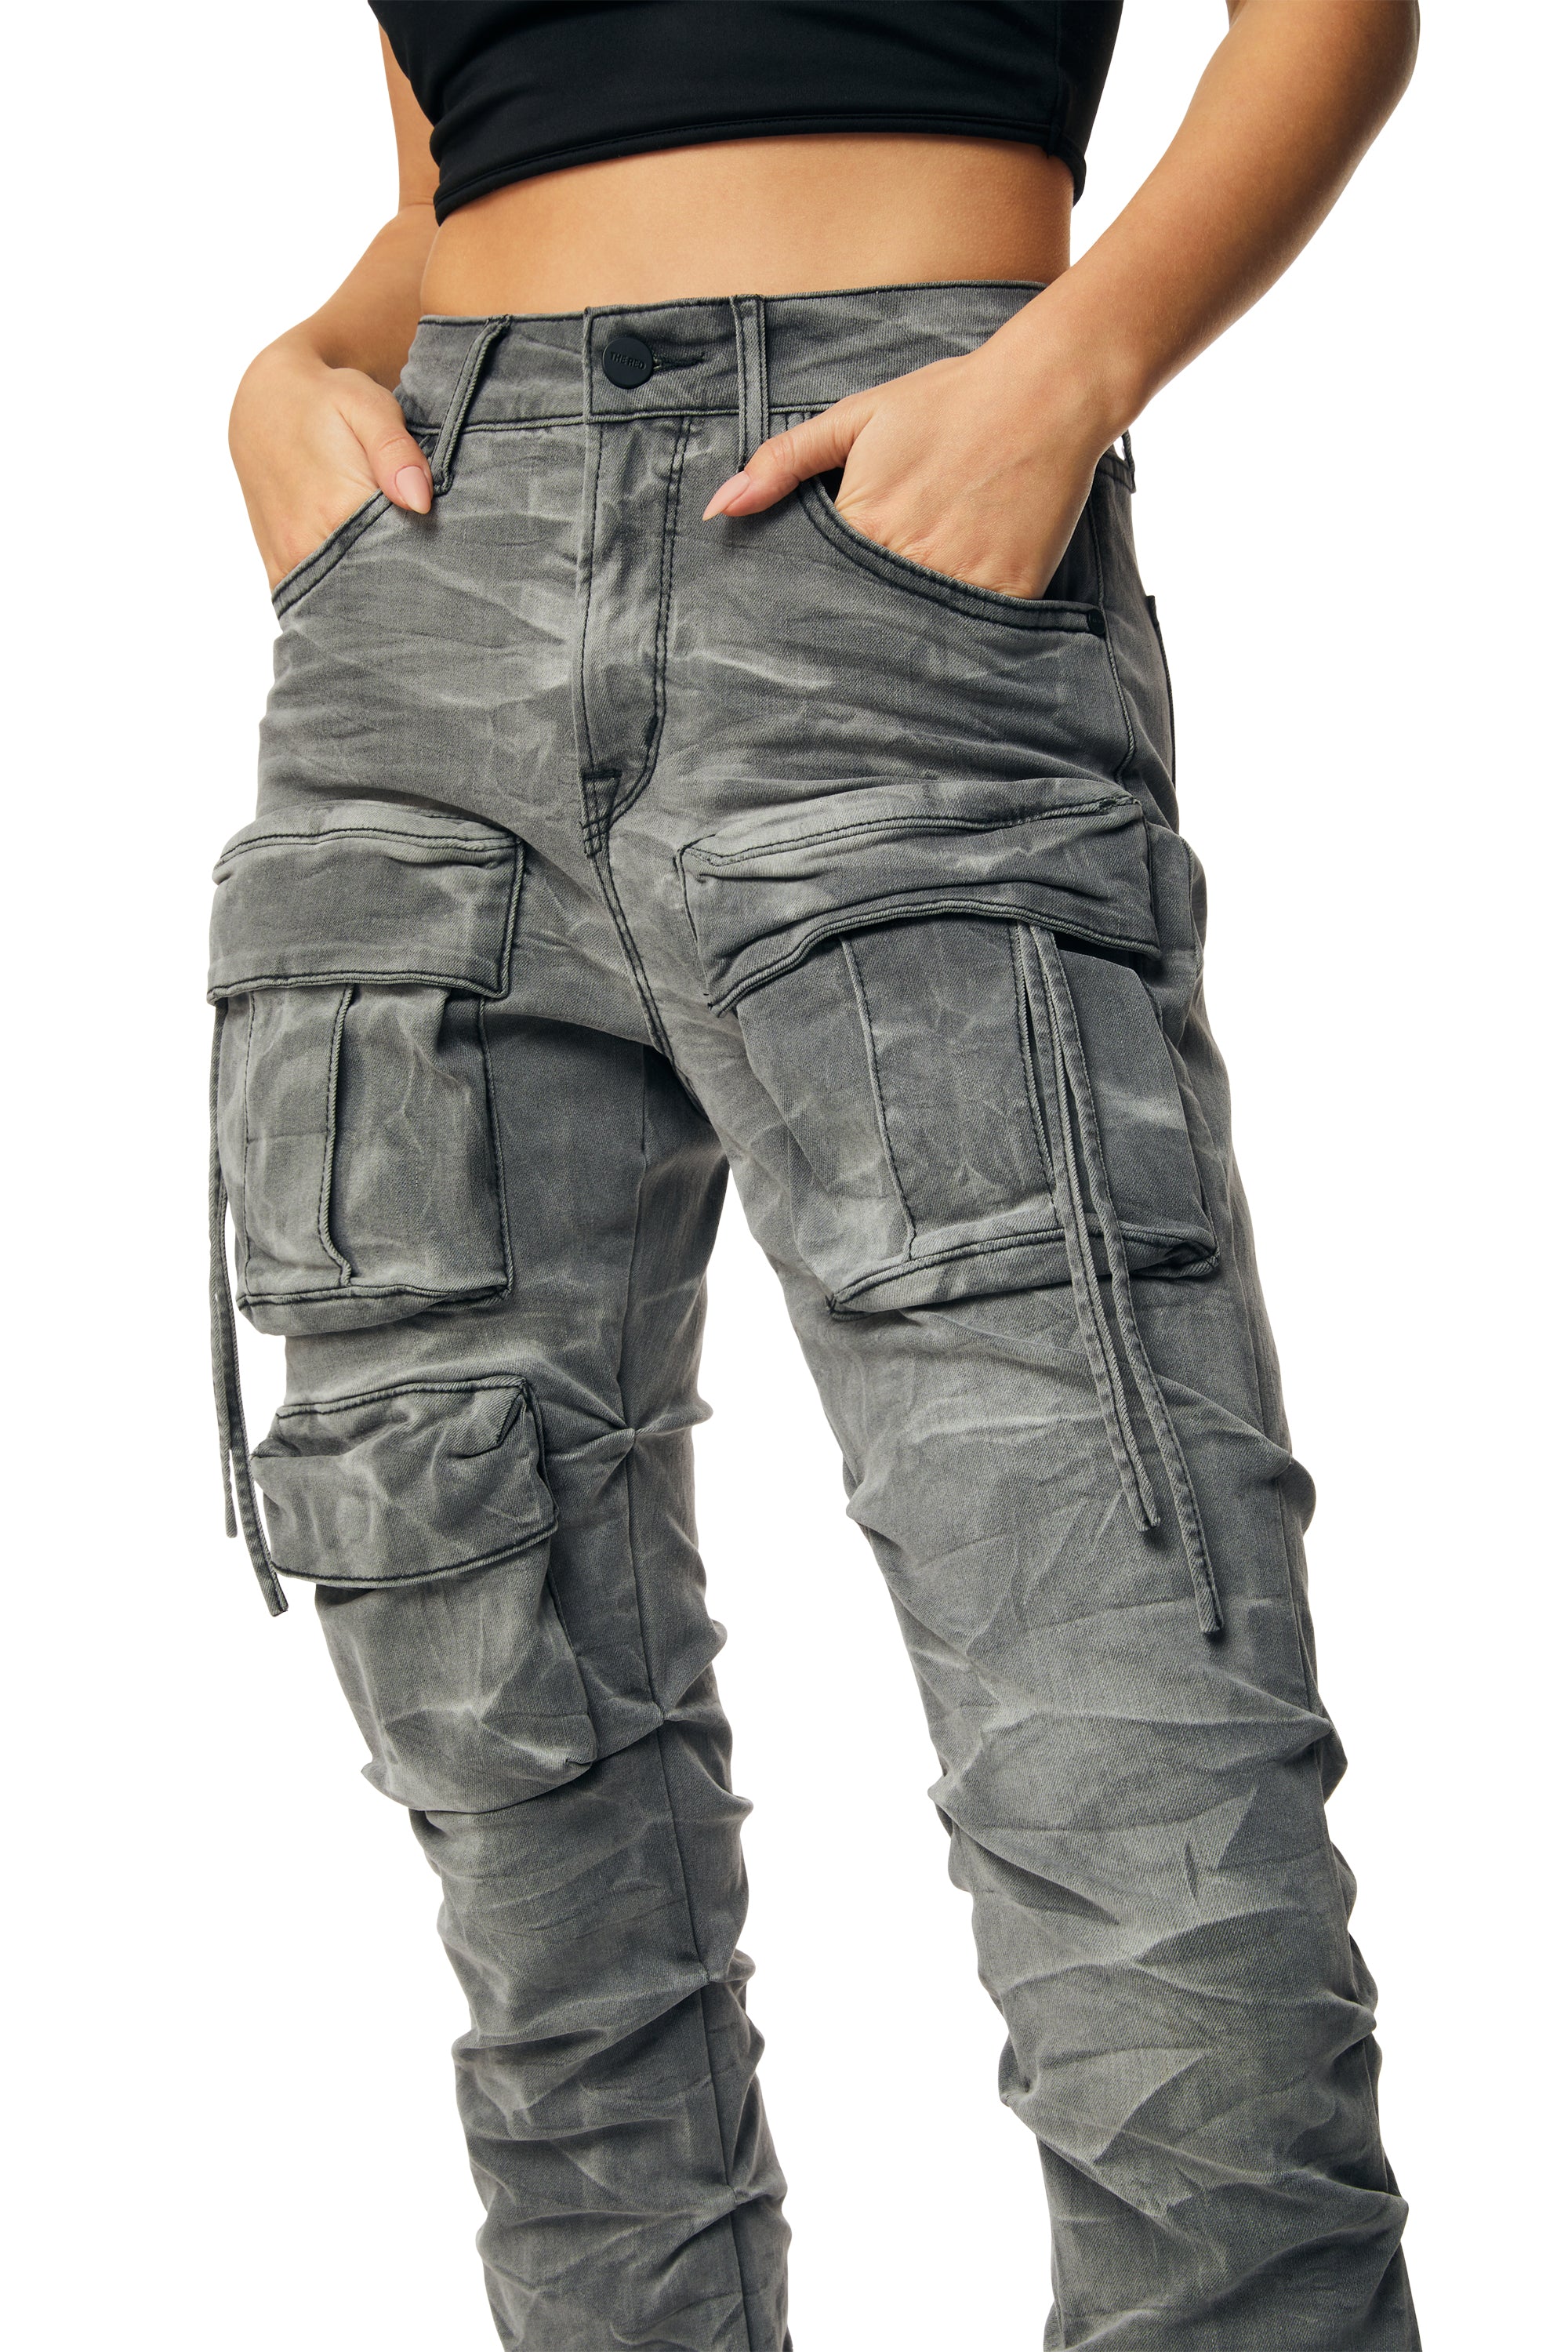 High Rise Cargo Stacked Denim Jeans - Twinkle Grey